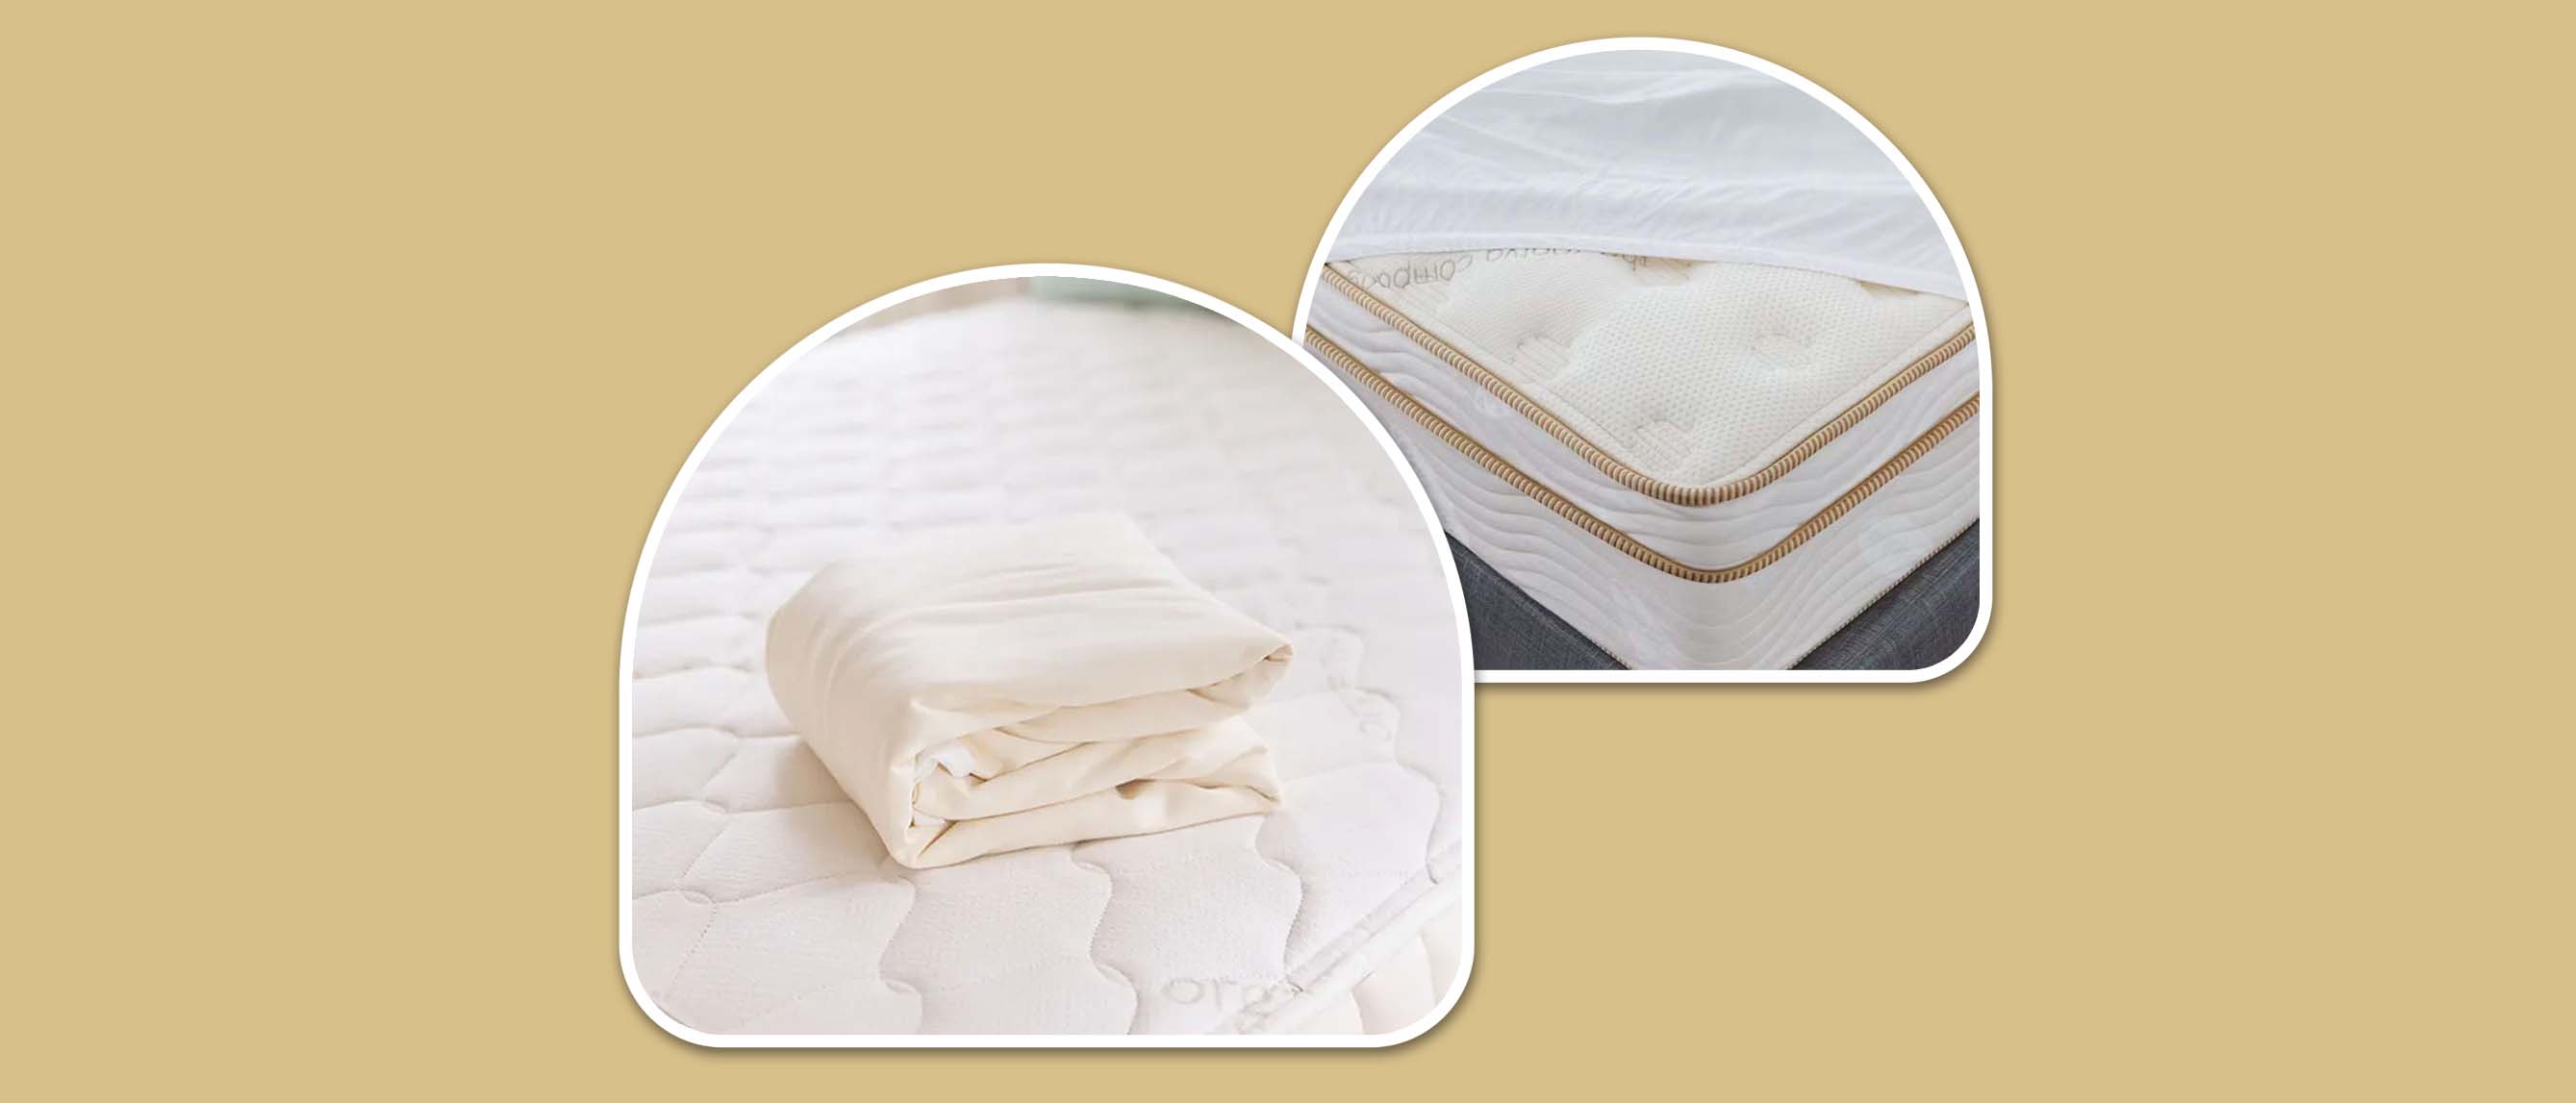 two of the best mattress protectors from Naturepedic and Saatva